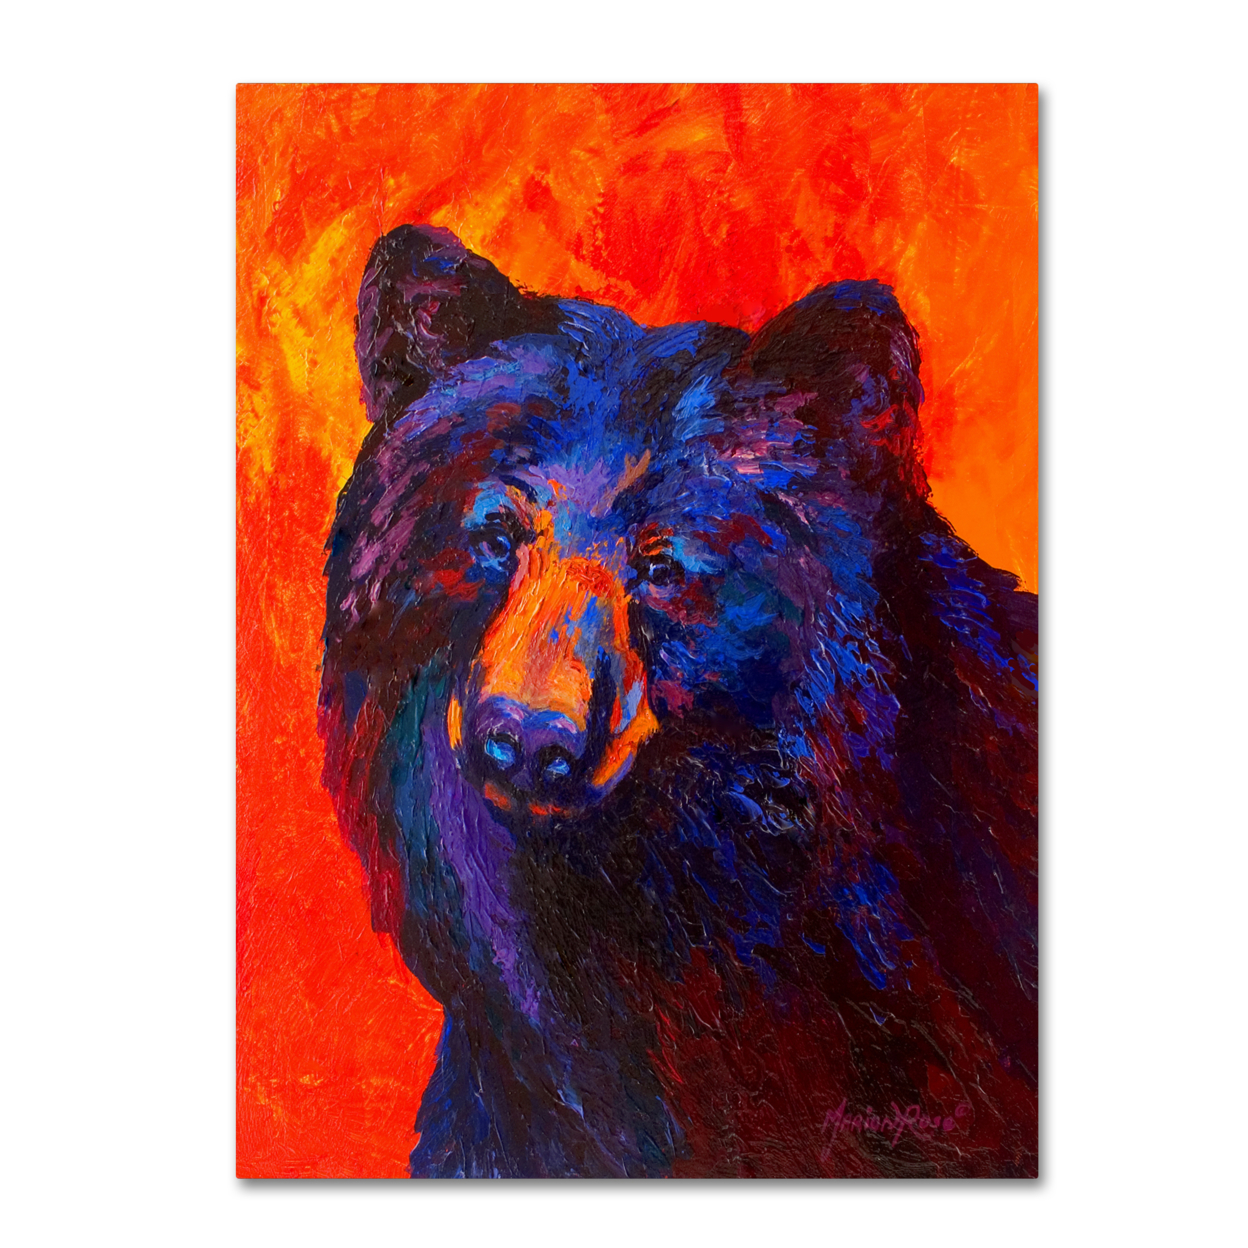 Marion Rose 'Thoughtful Black Bear' Ready To Hang Canvas Art 35 X 47 Inches Made In USA